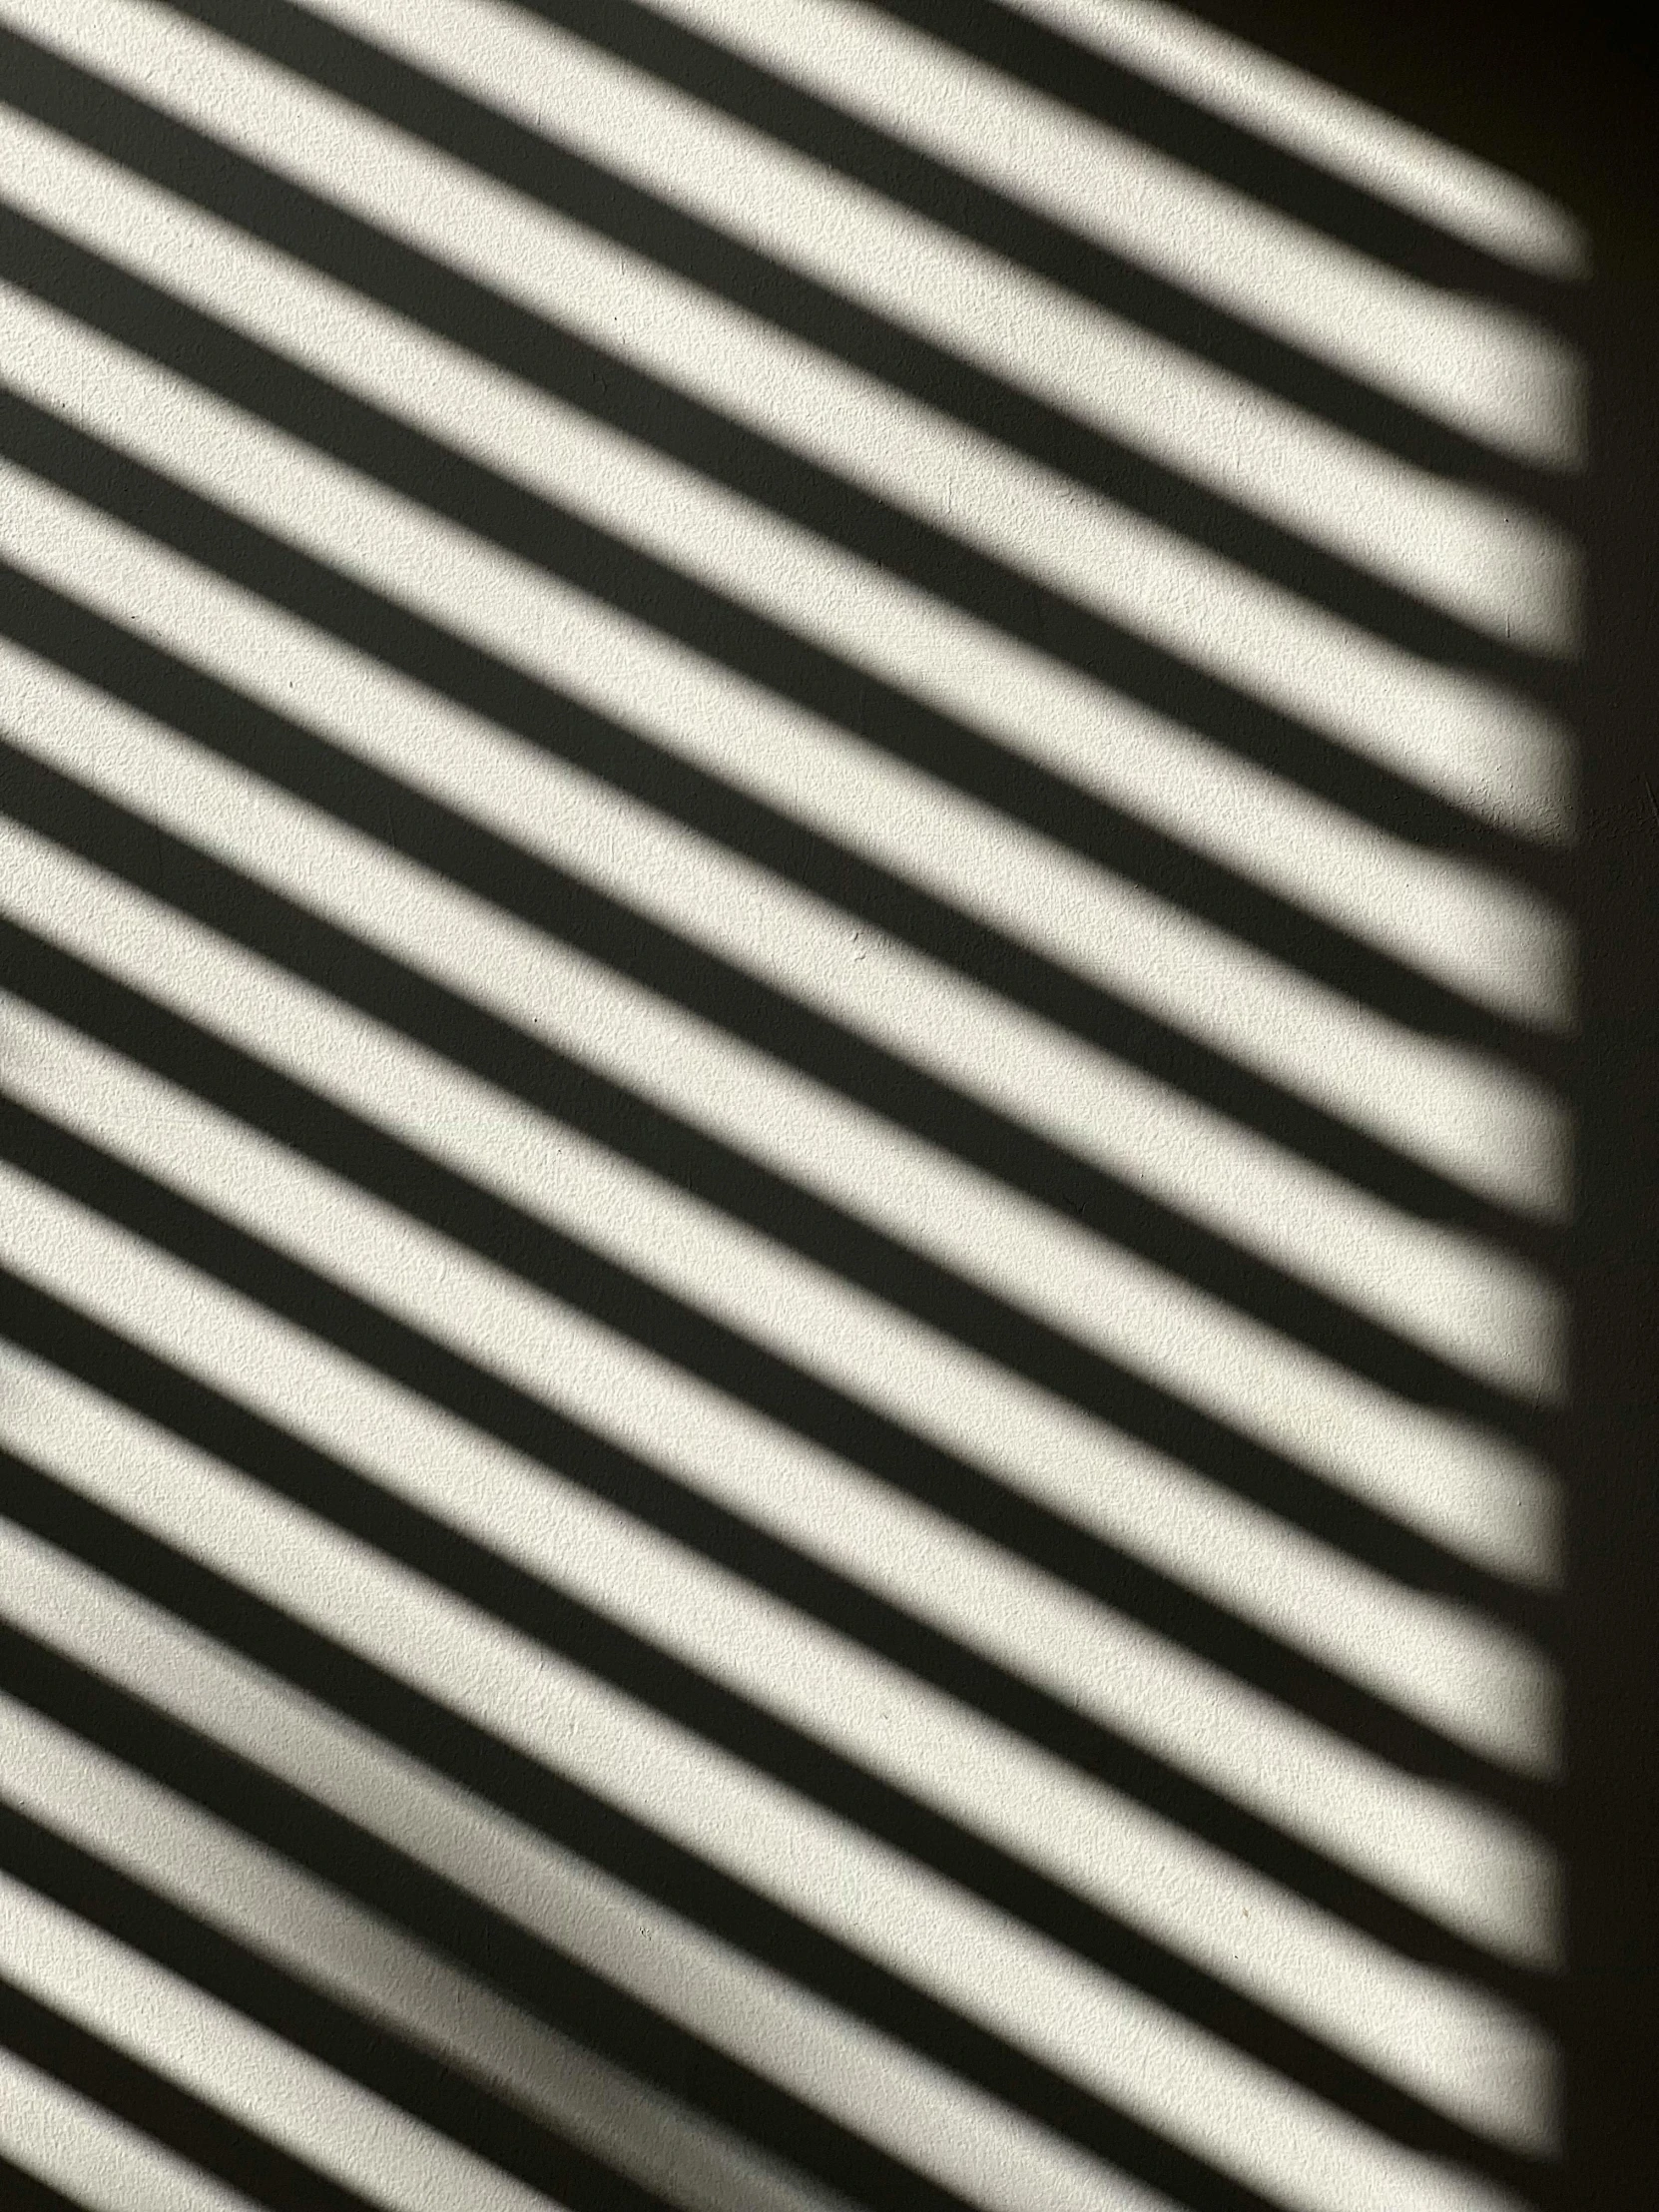 a view of the outside of a window blinds with vertical blind